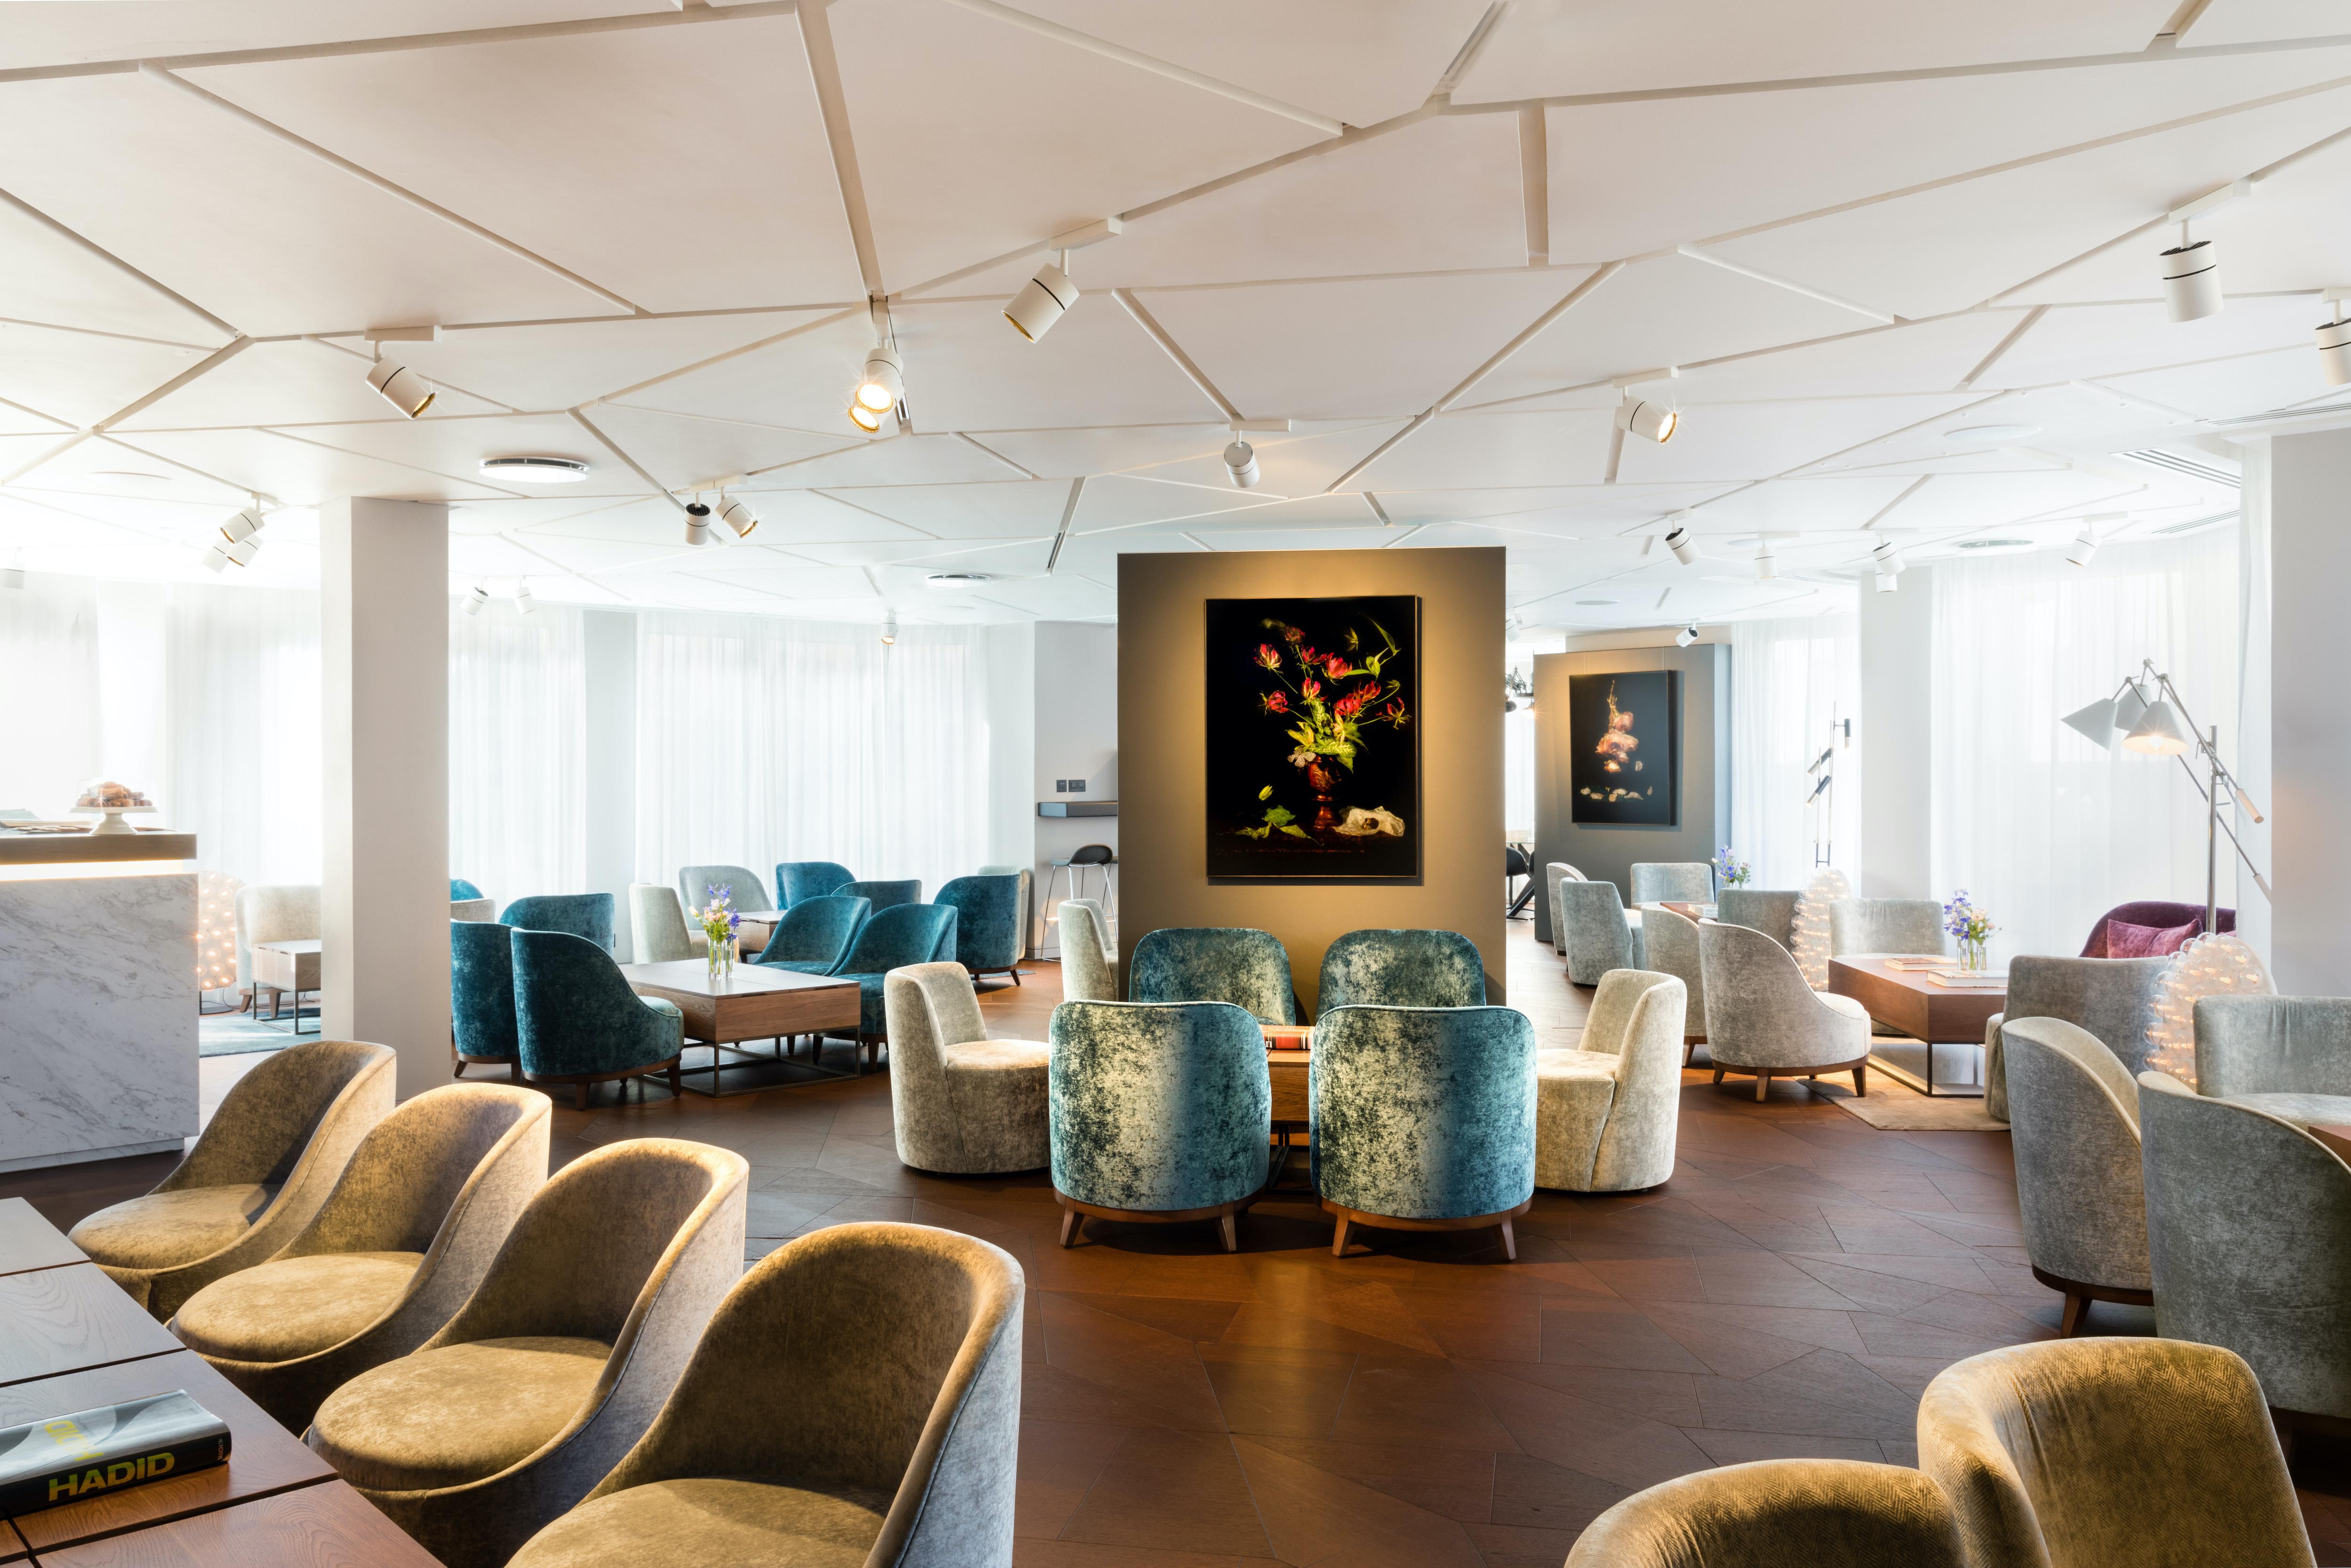 HAY HILL Mayfair - Private Members Club - Business Lounge - Meting Space